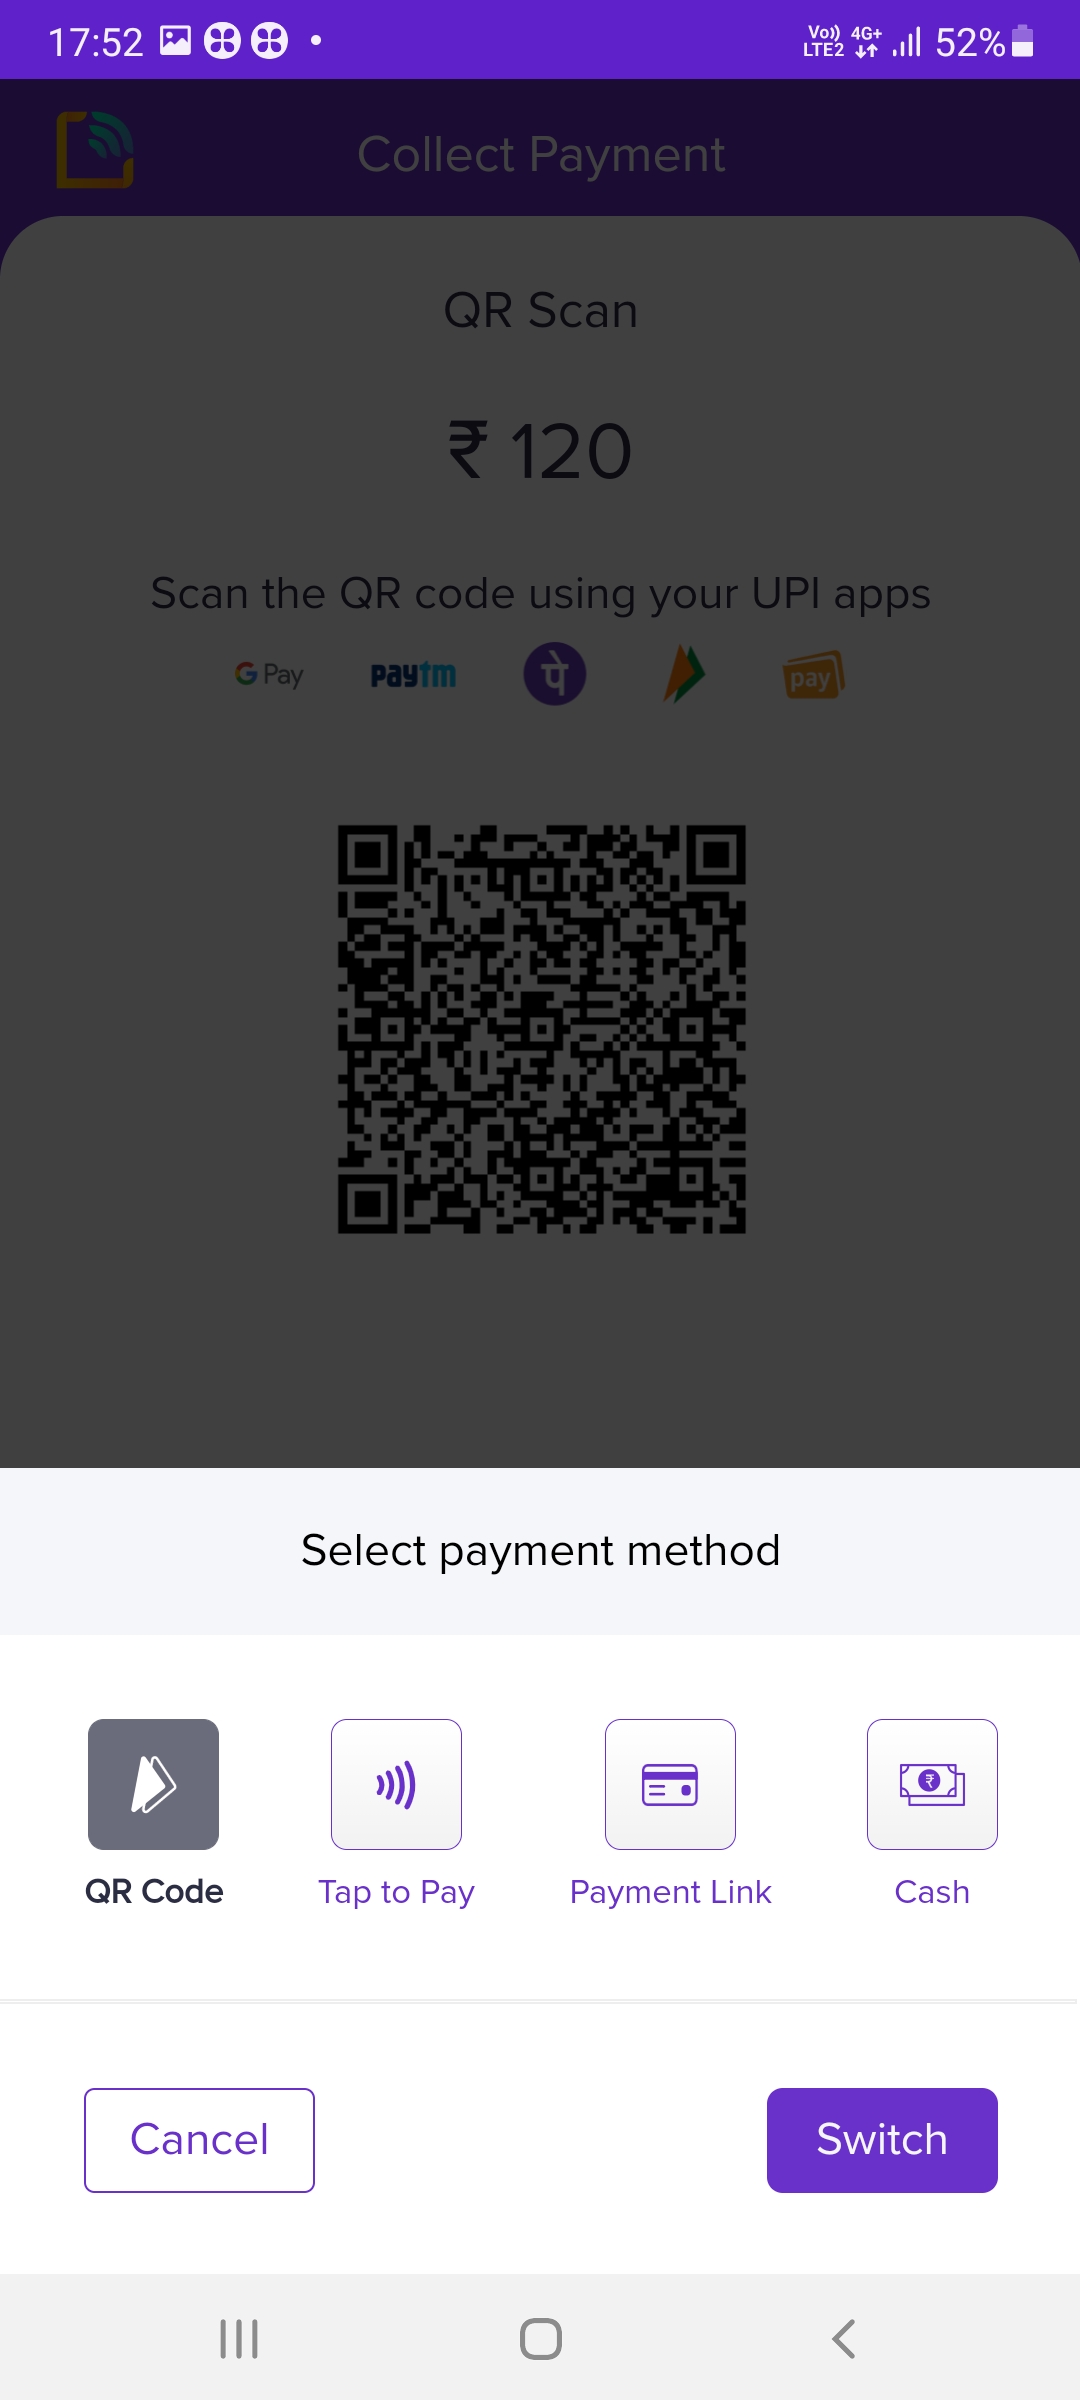 Switch Payment Method - 2